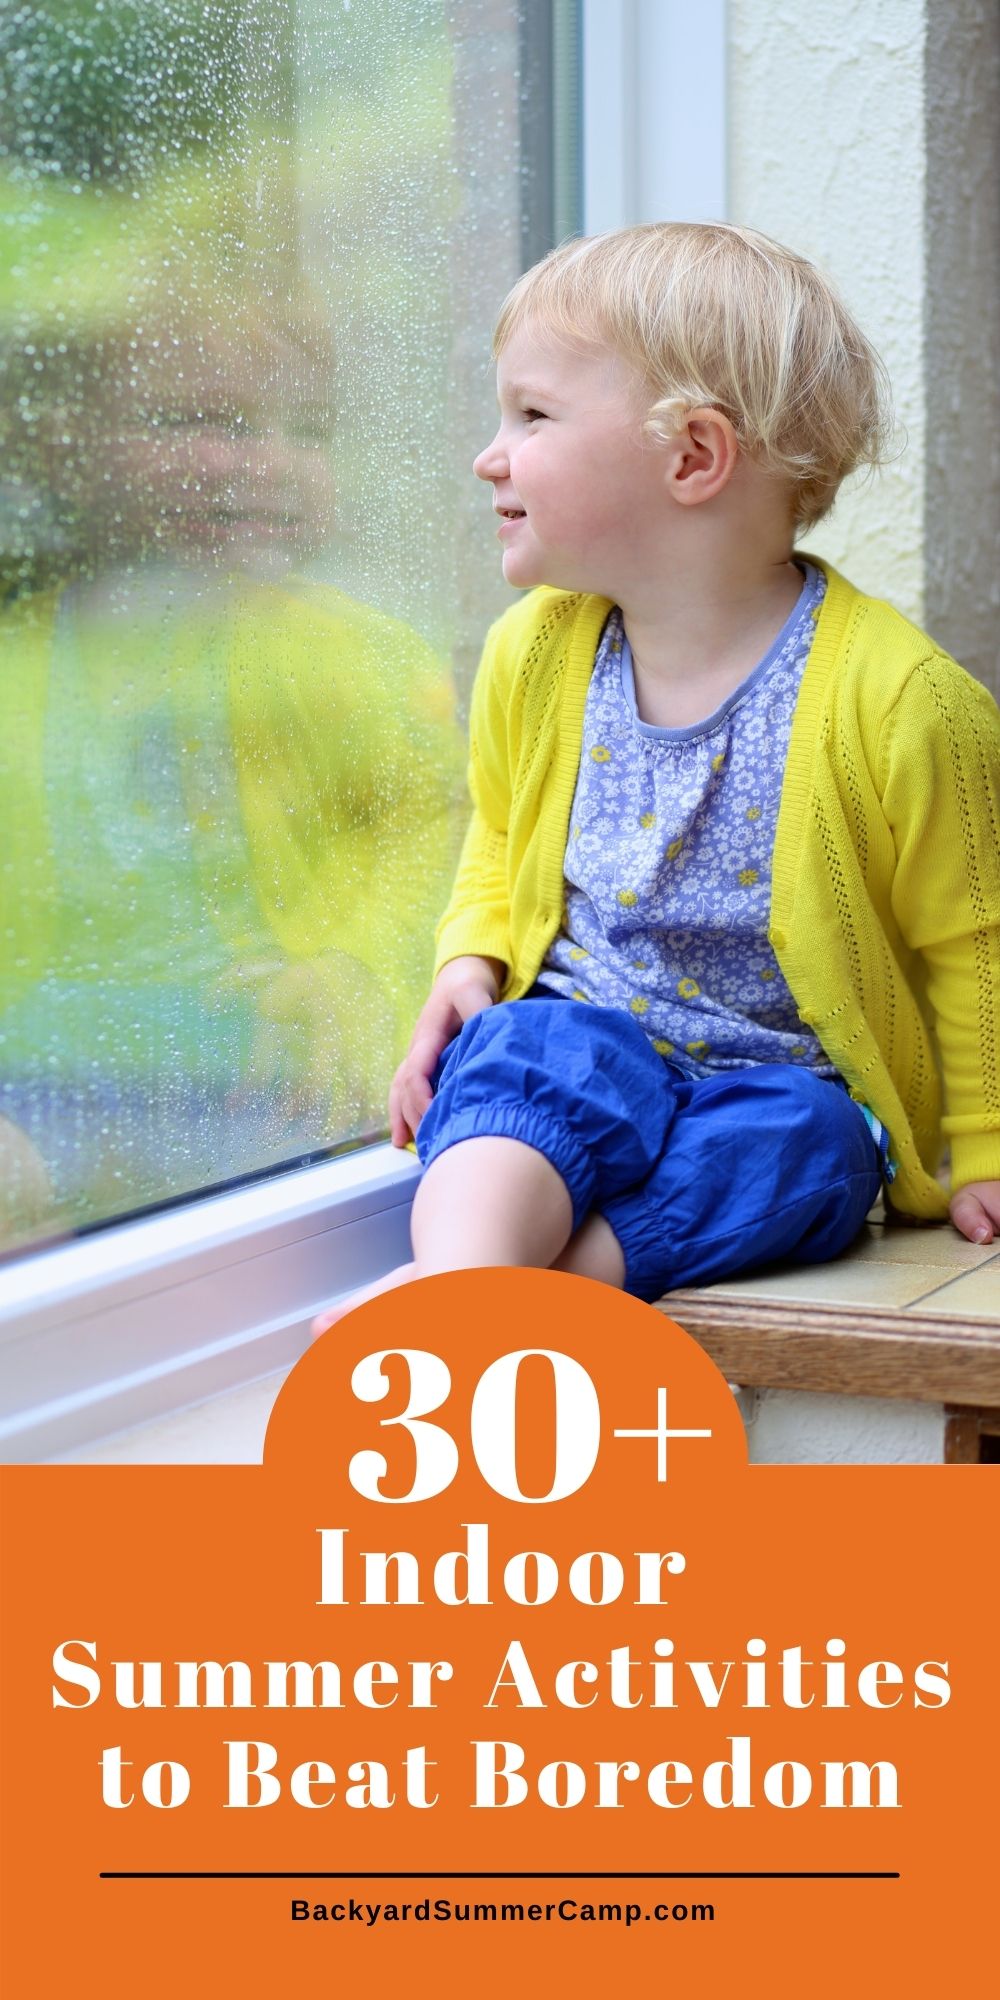 Child looking out a window on a bright but rainy day with text overlay that reads "30+ indoor summer activities to beat boredom."